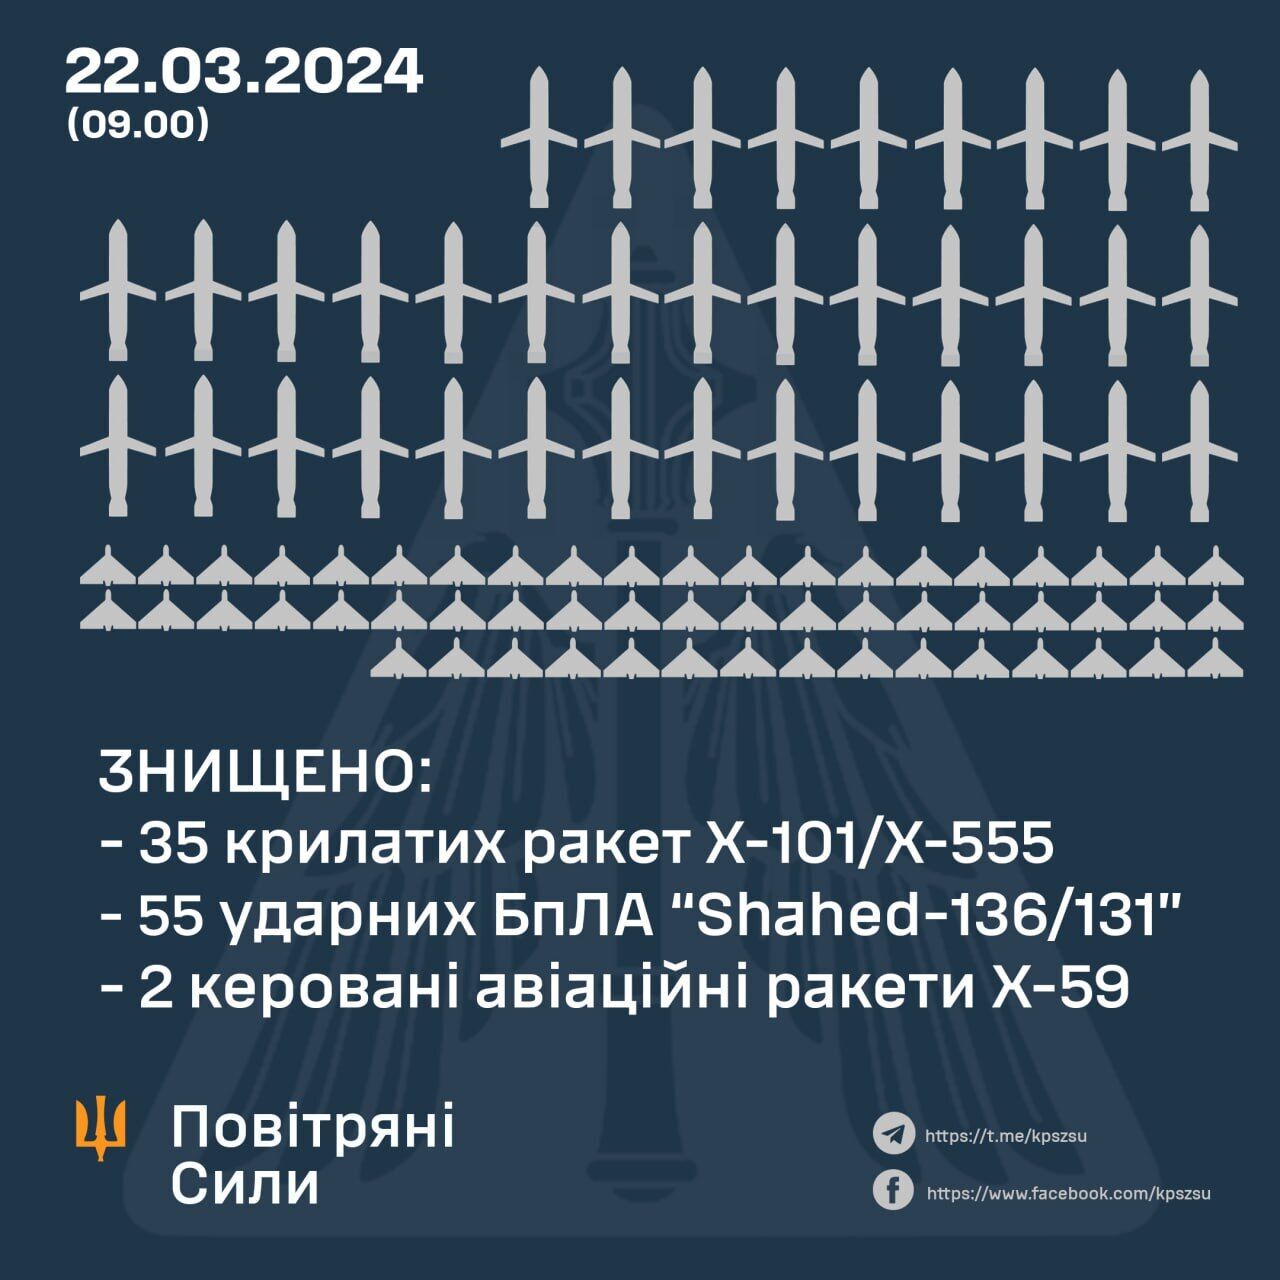 X-101/555 missiles covered the longest distance of 2,300 km: what Russia used to attack Ukraine on March 22 and what is known about the consequences